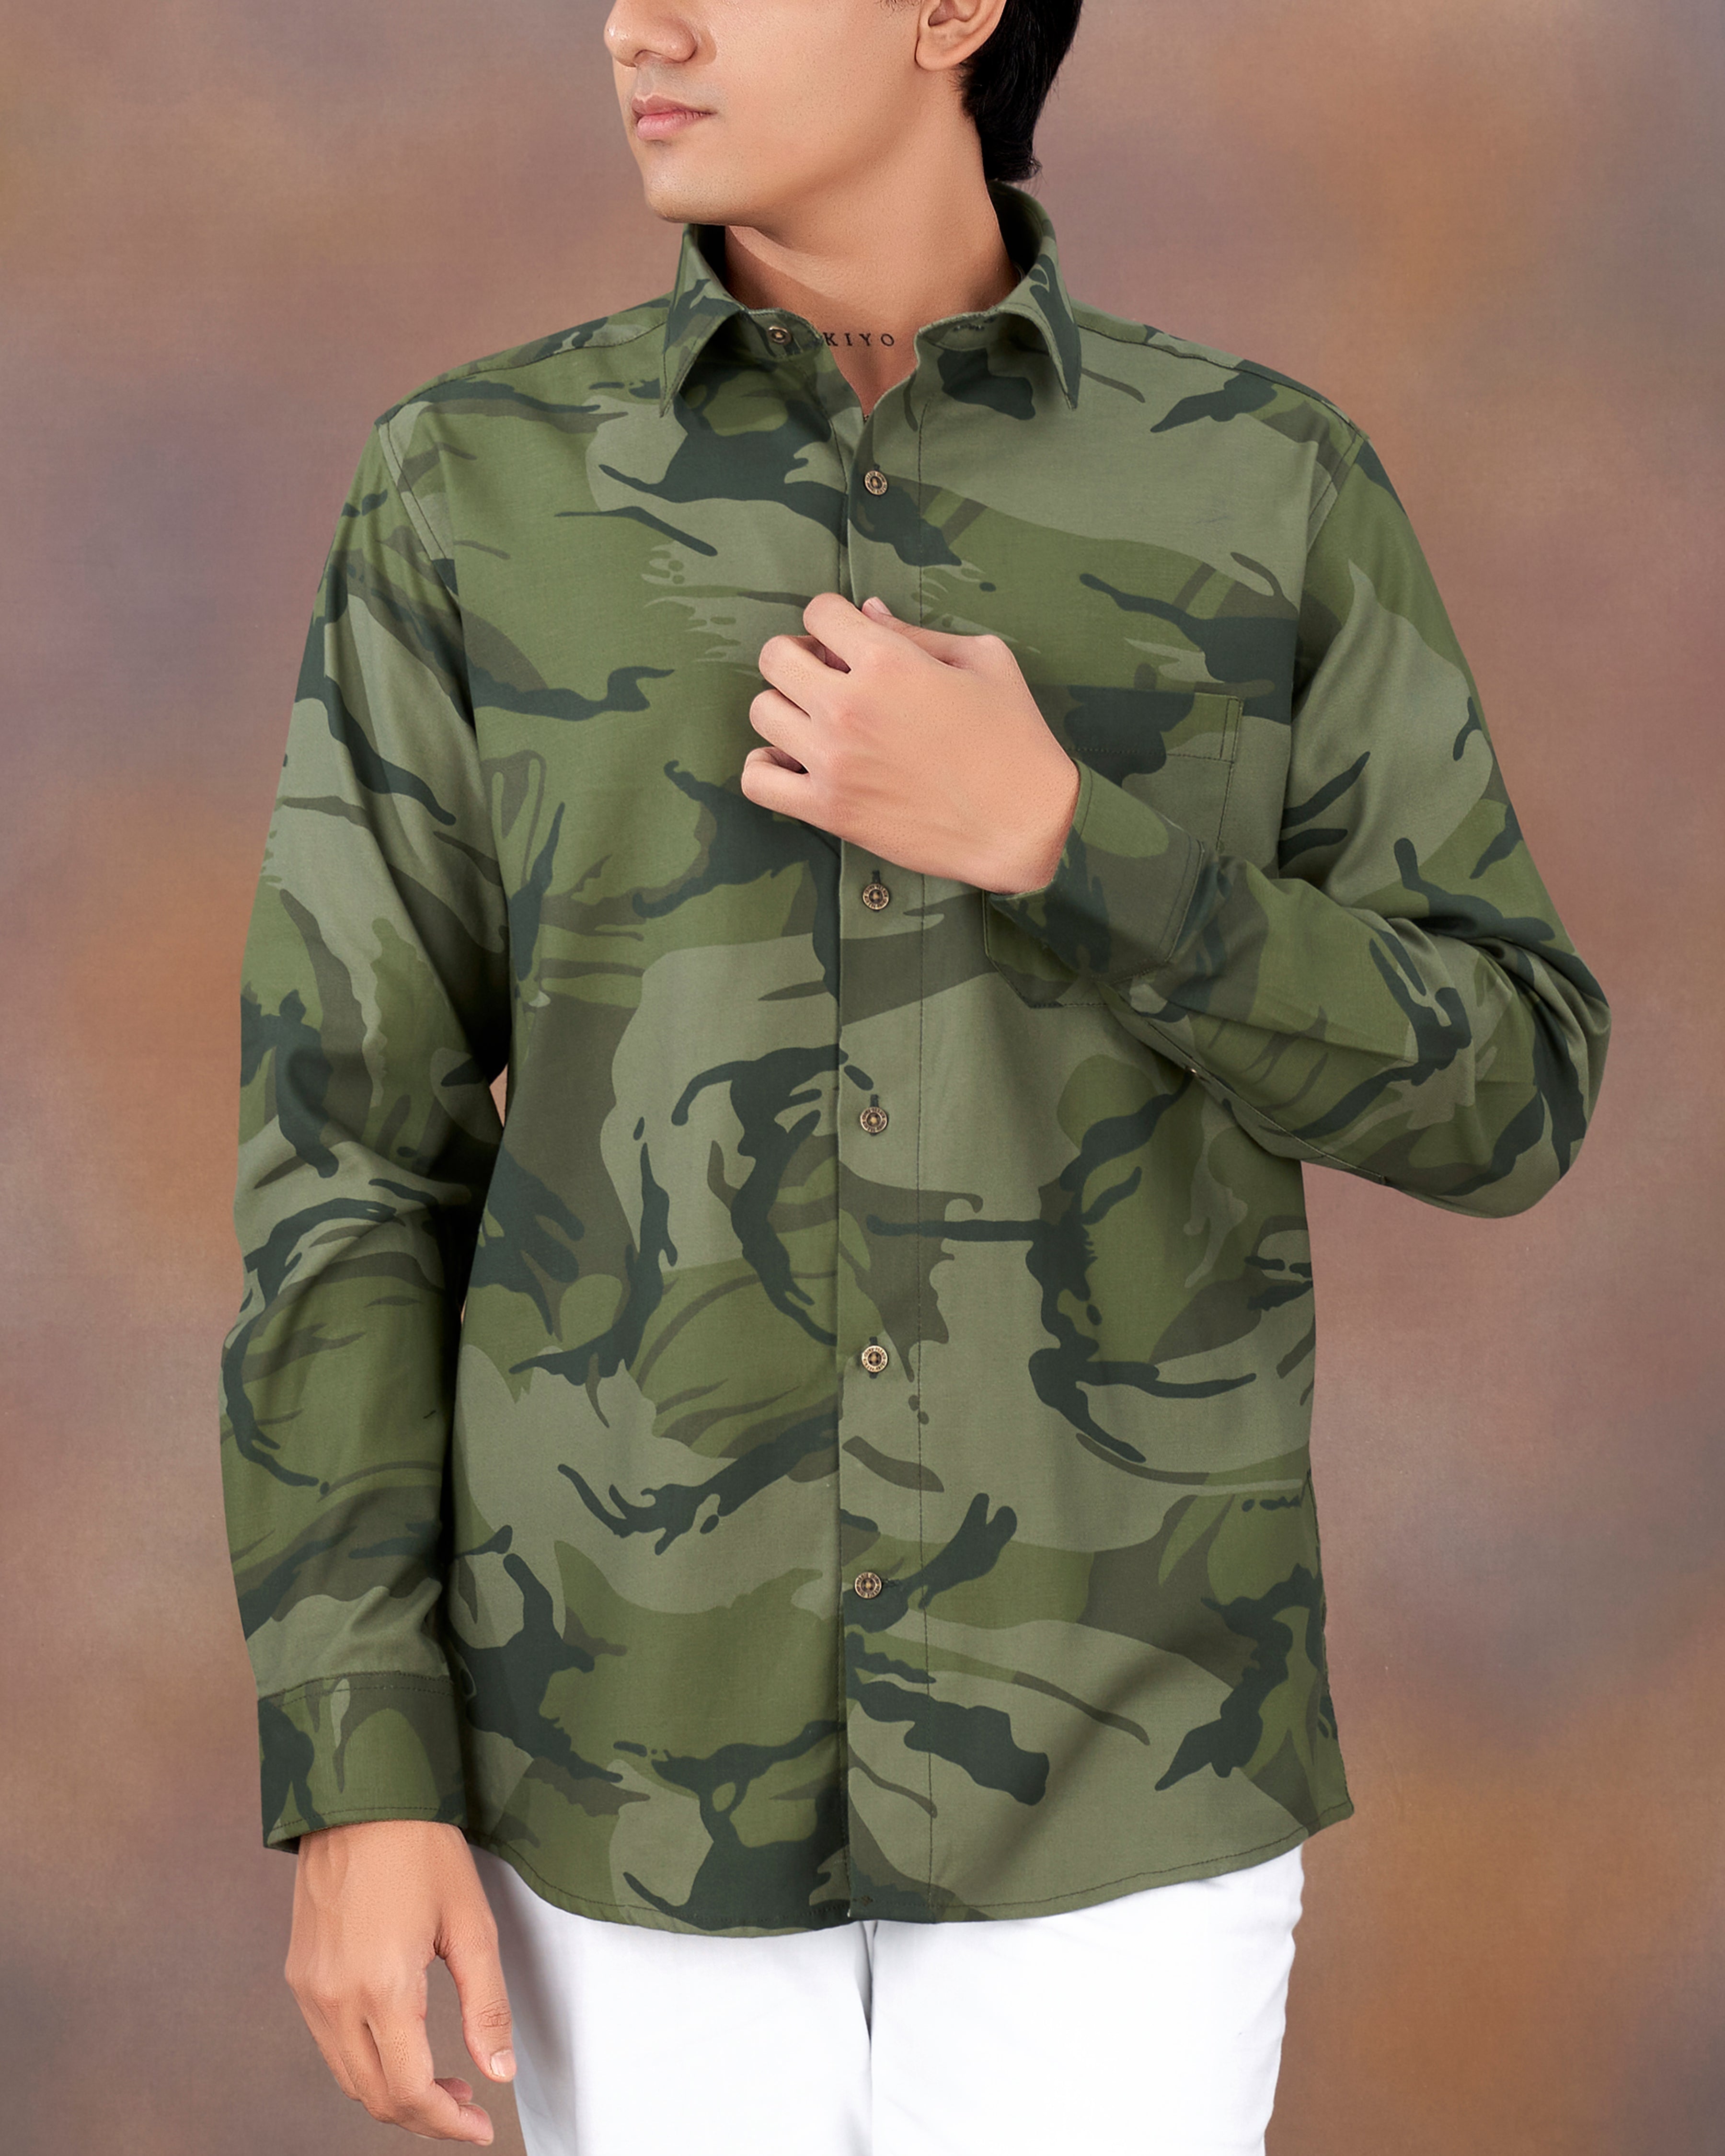 Fuscous Green with Birch Dark Green Camouflage Printed Royal Oxford Shirt